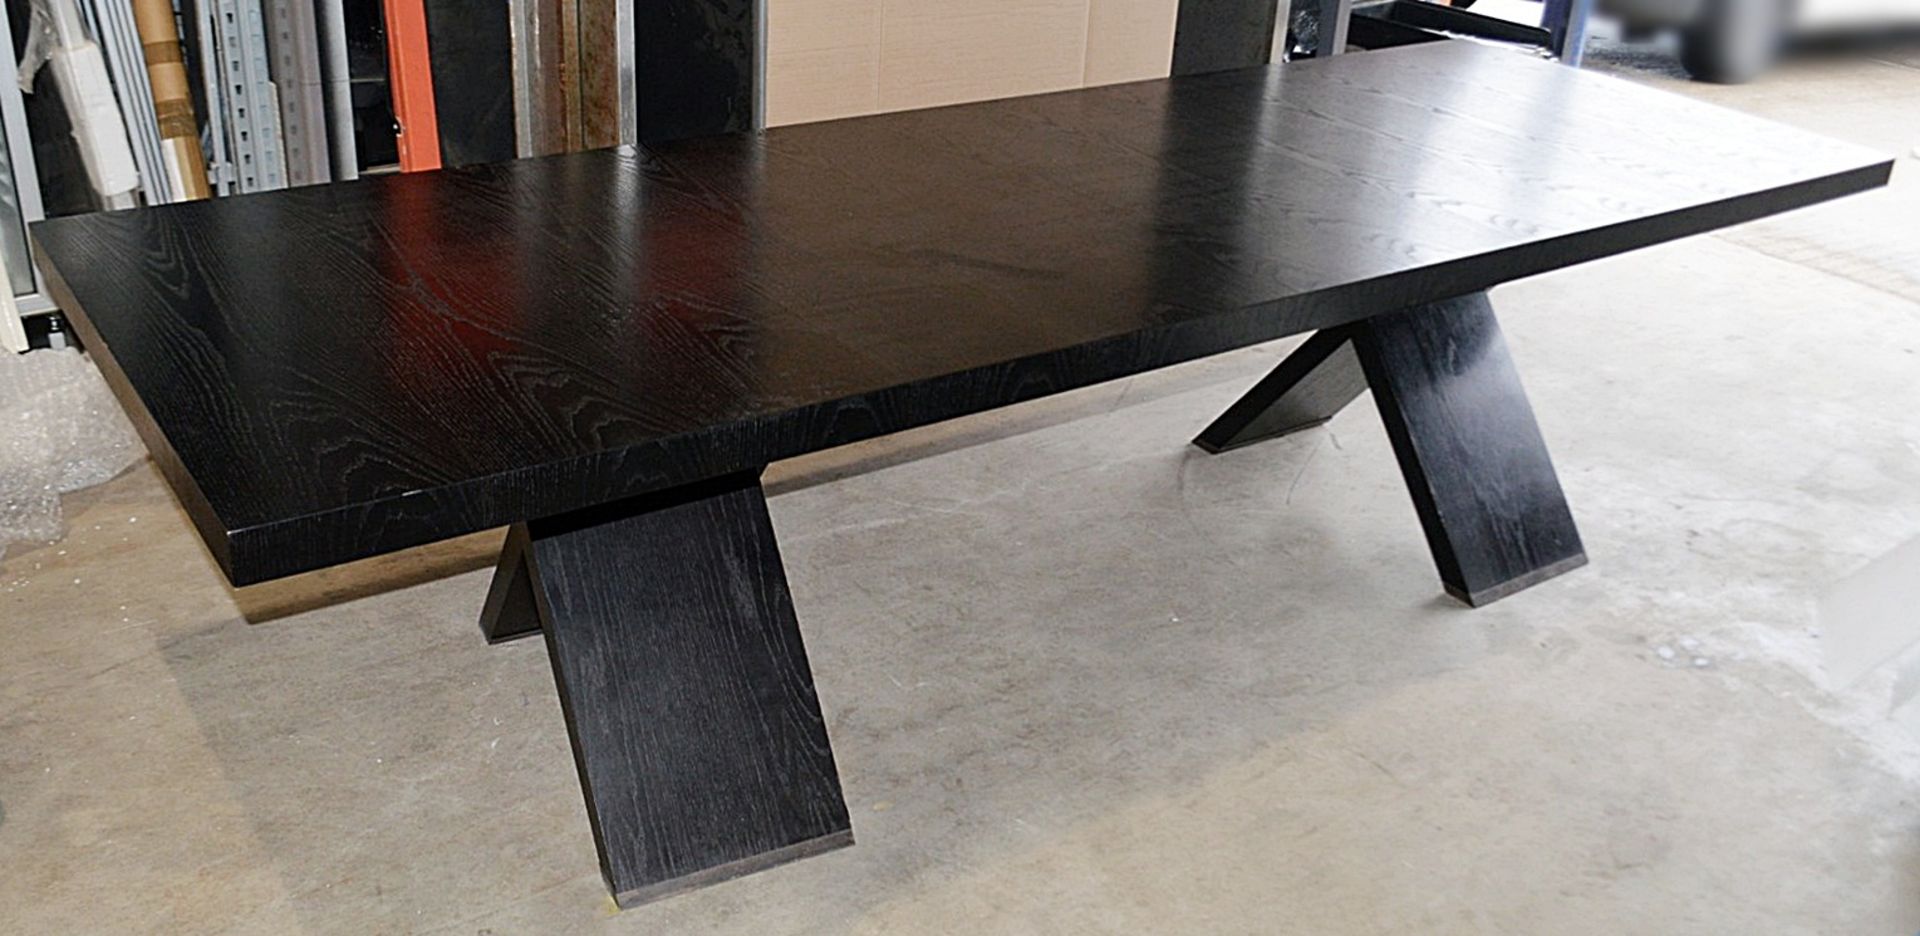 1 x Large 3-Metre Wooden Dining Table With Cross Legs In A Near Black Finish - From An Exclusive